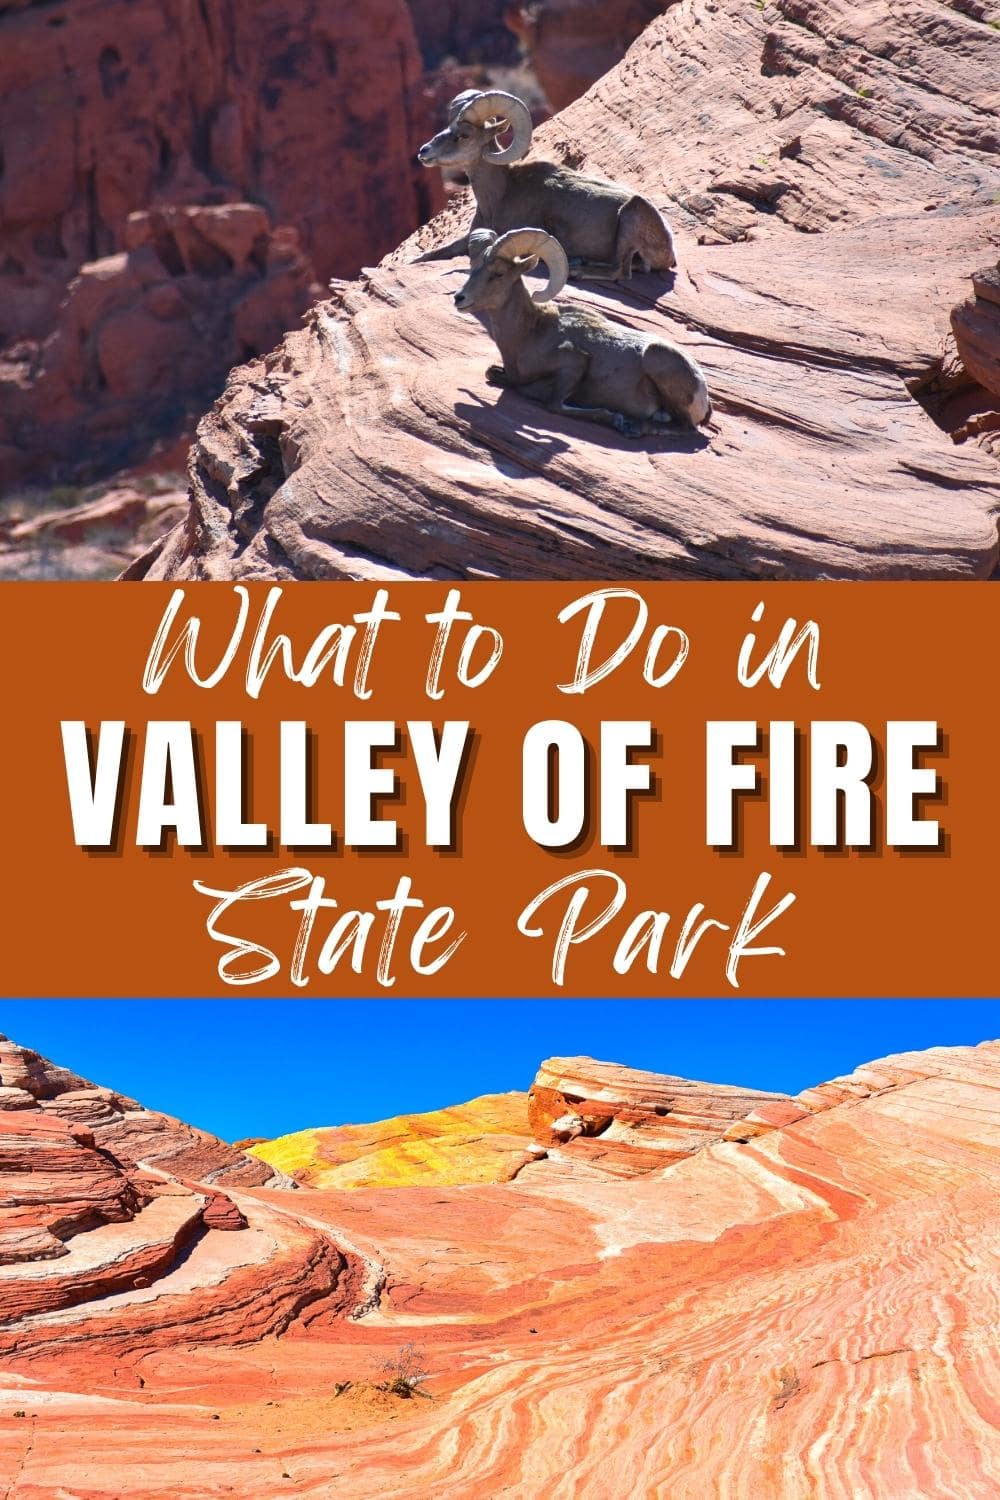 Top 5 Amazing Things to Do in Valley of Fire State Park: An Easy Day Trip from Las Vegas